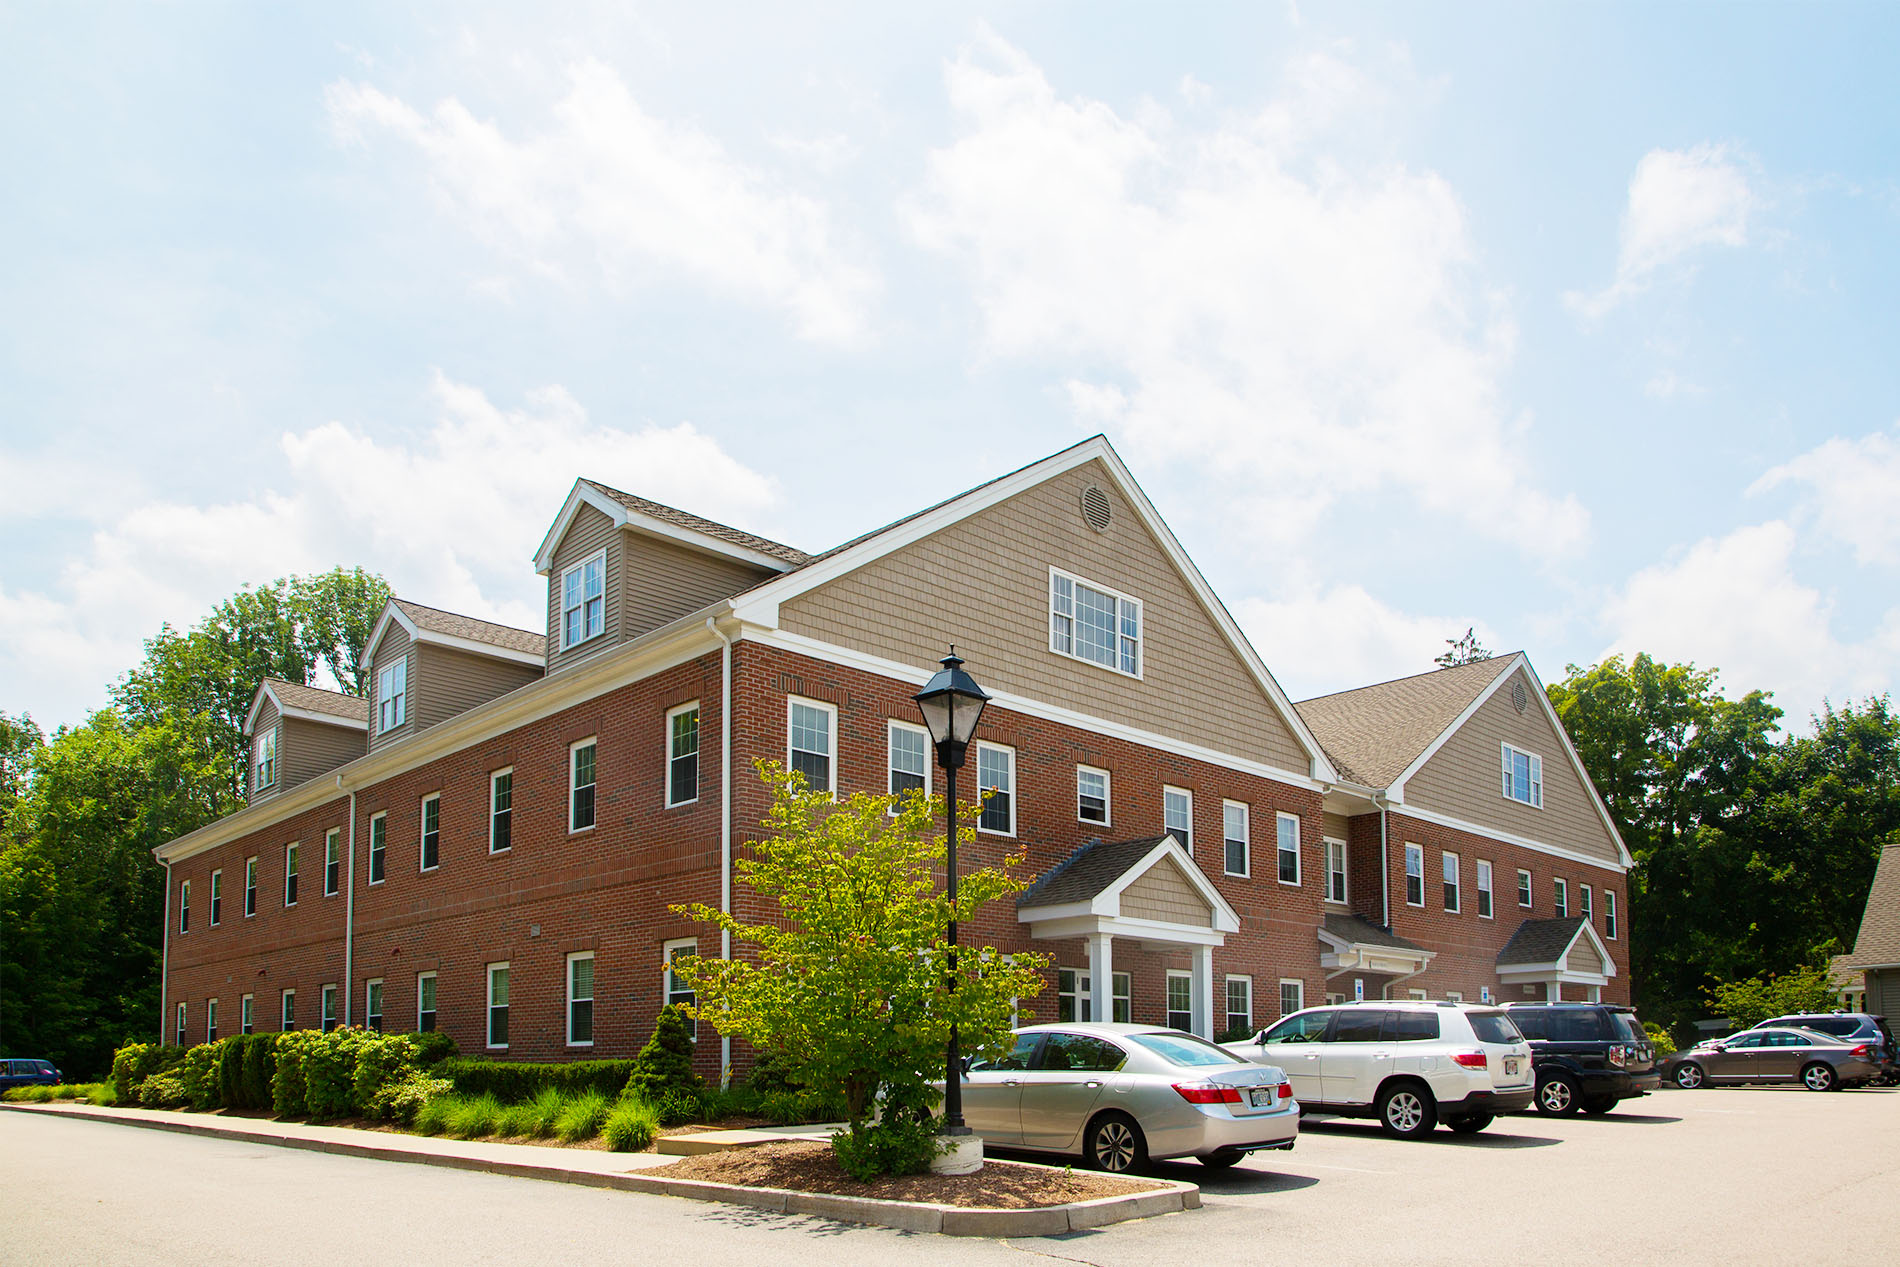 Clinical Services of Rhode Island, Greenville in Greenville